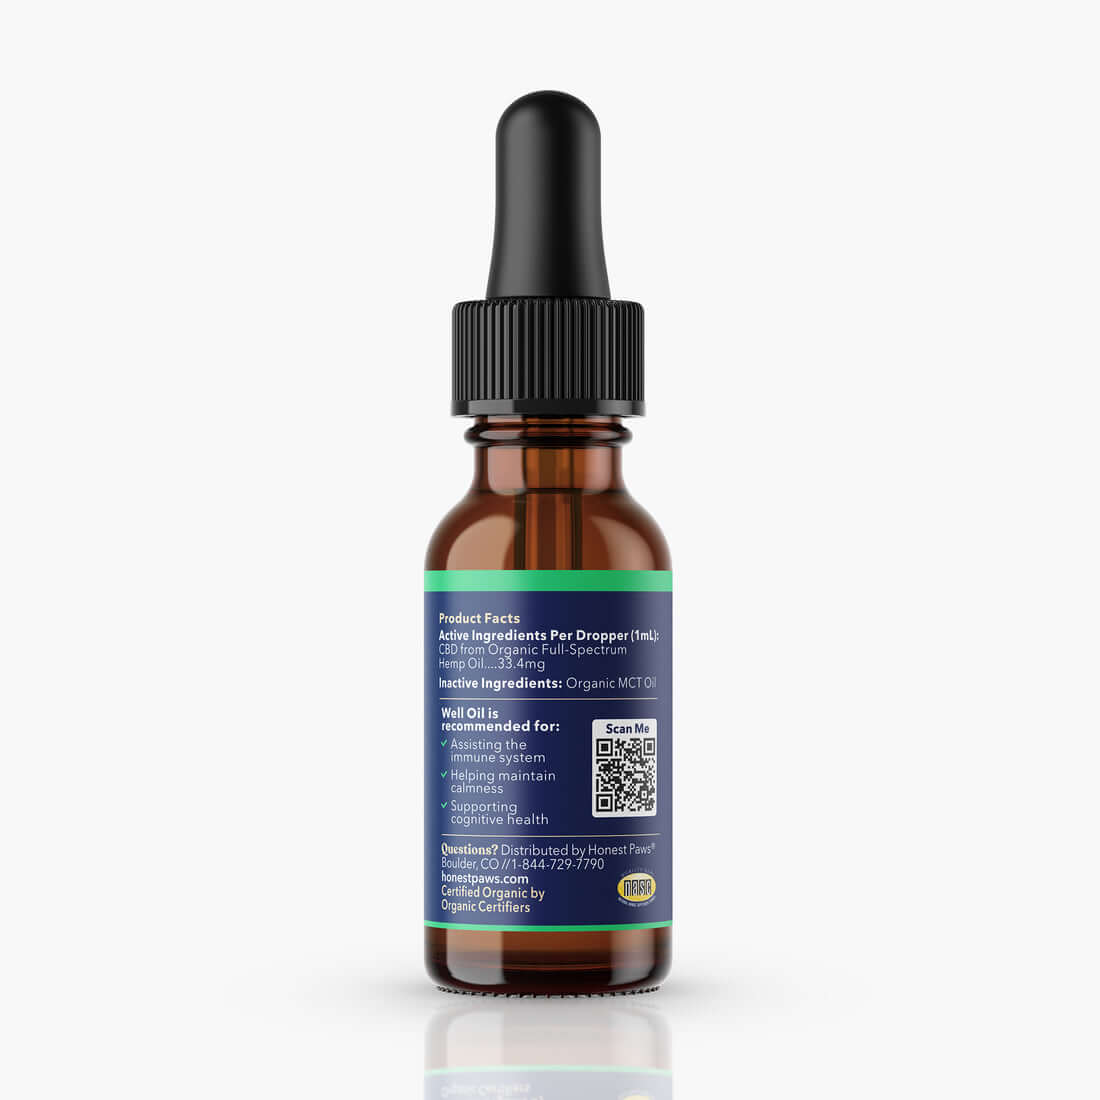 Extra Strength CBD Oil for Dogs - Well image_3